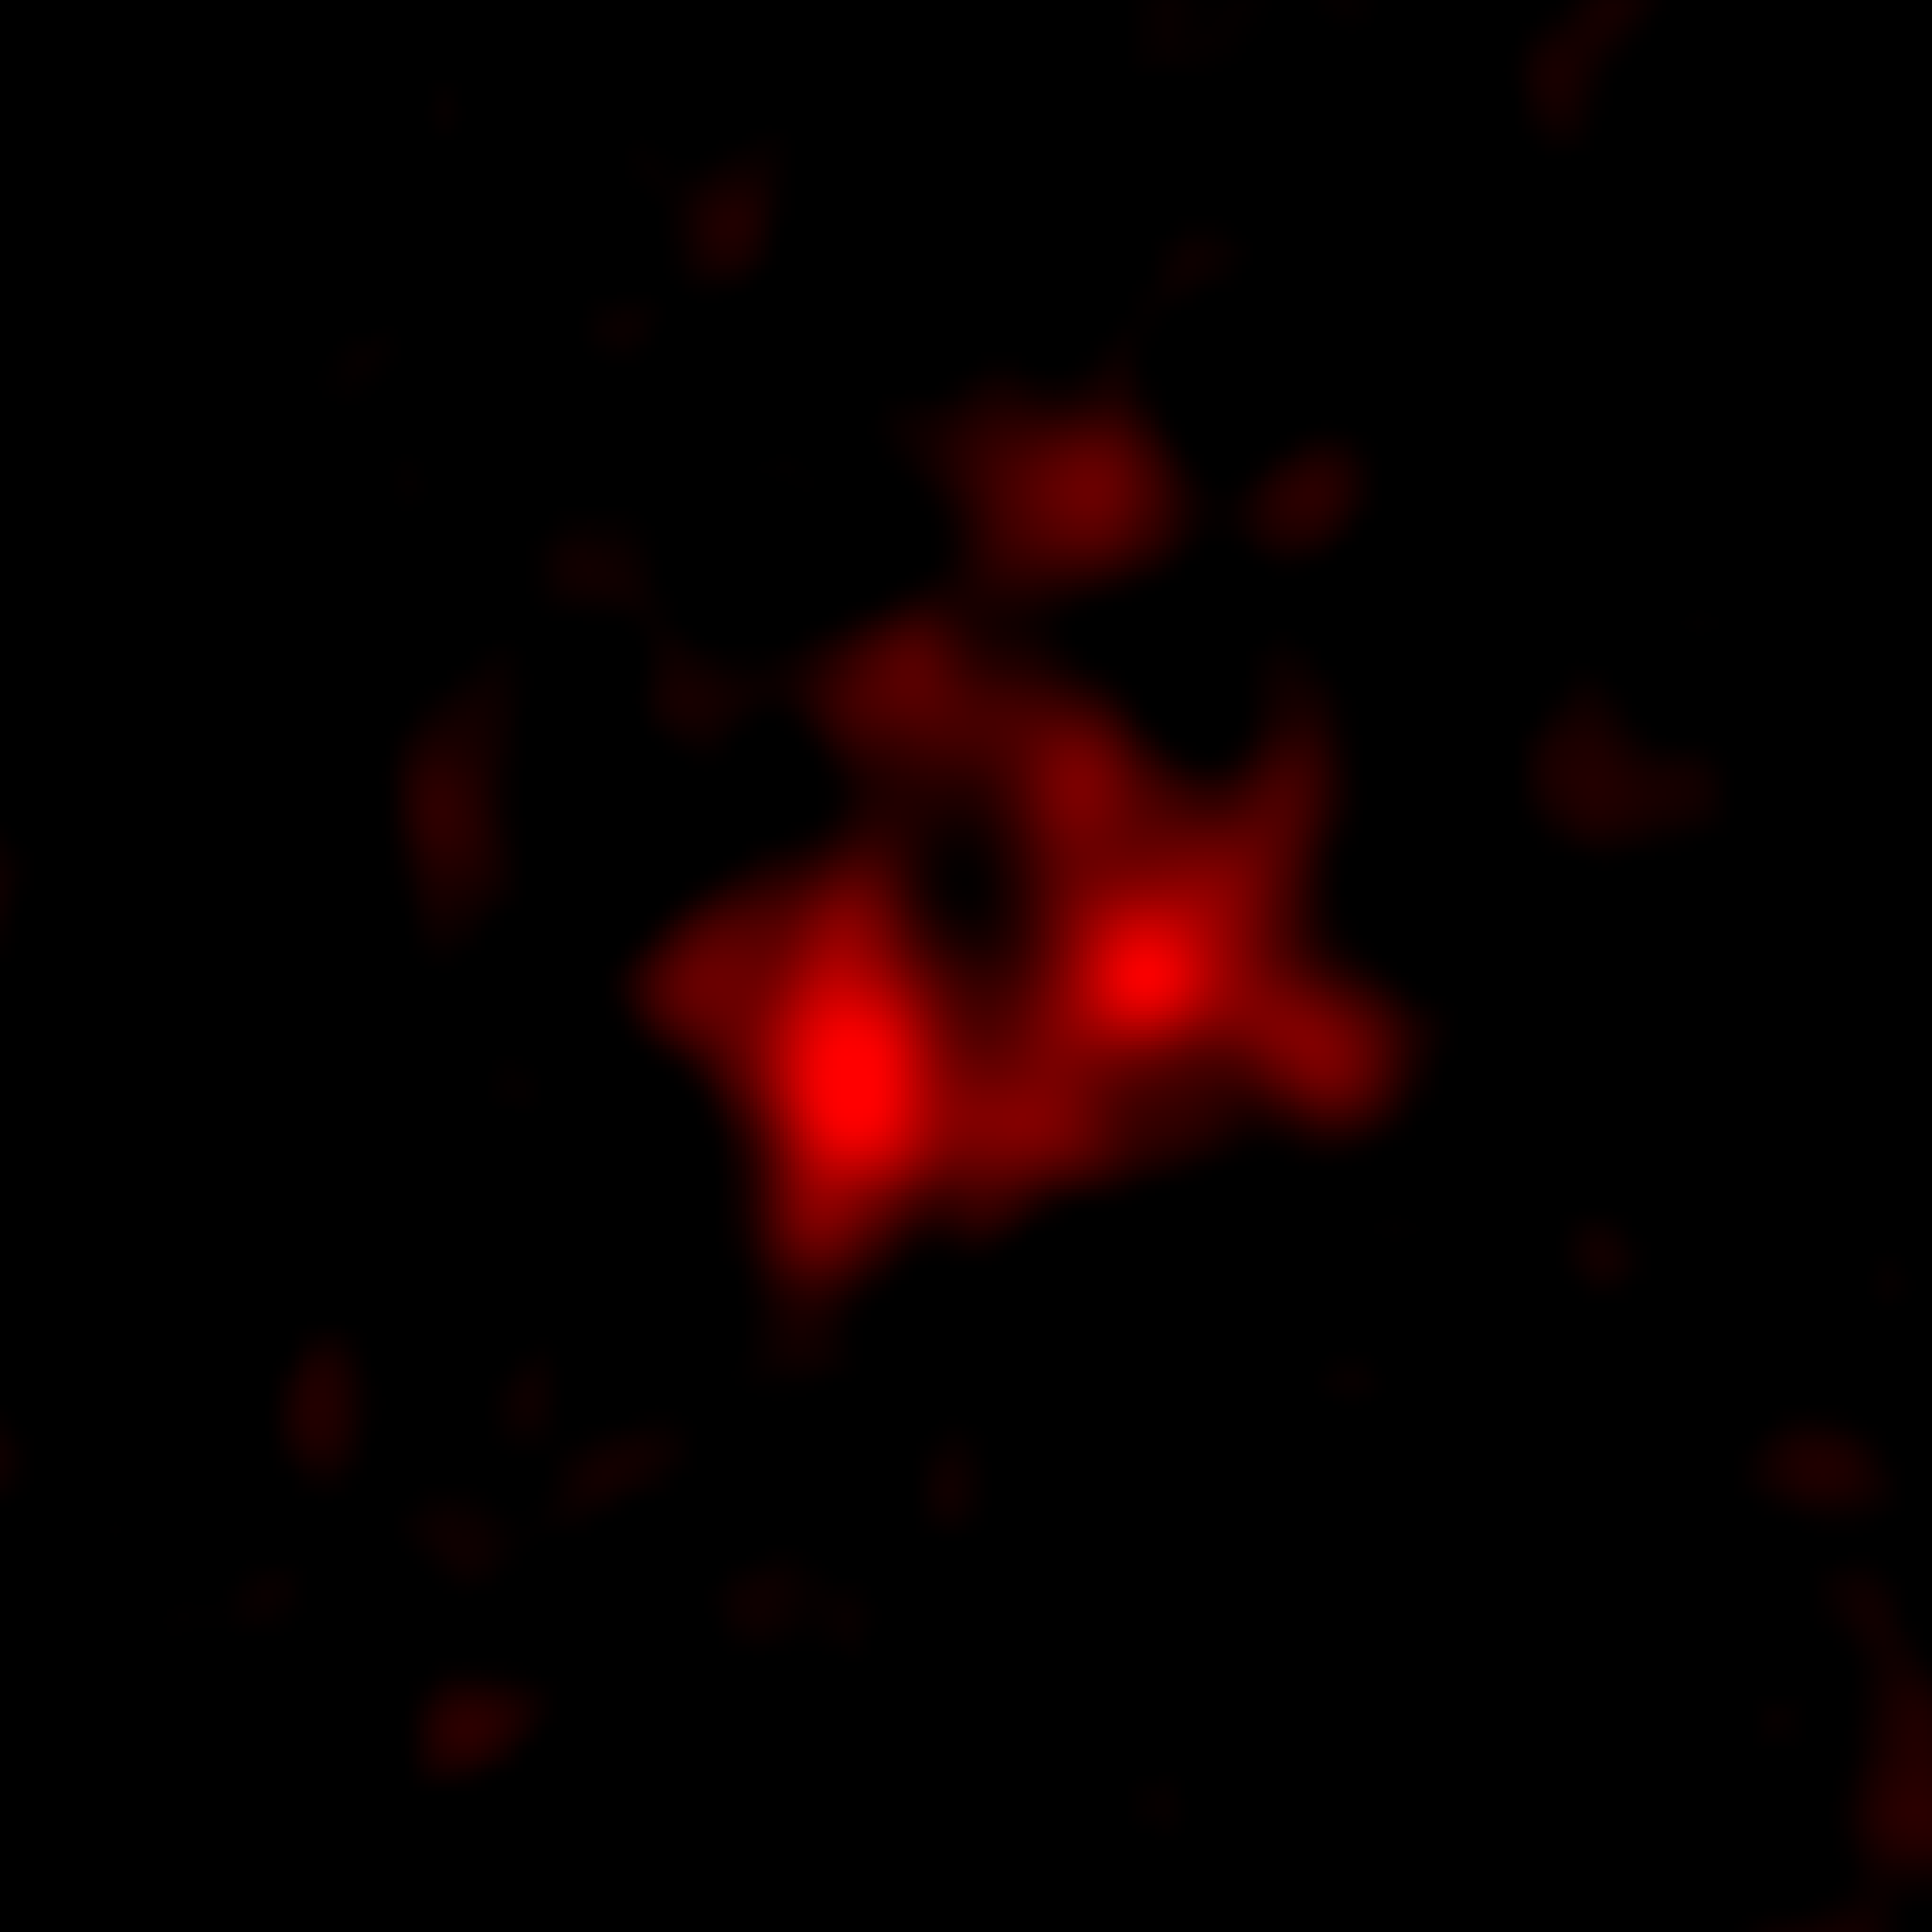 The ALMA image of the galaxy MACS0416_Y1 located 13.2 billion light-years away, harboring the farthest ever dark nebula. The image spans approximately 15,000 light-years on each side. Image captured by ALMA, only showing the radio waves emitted by the dust within the dark nebula. A vertically elongated elliptical cavity, a candidate for a superbubble, is visible in the central region." Credit: ALMA (ESO/NAOJ/NRAO), Y. Tamura et al.